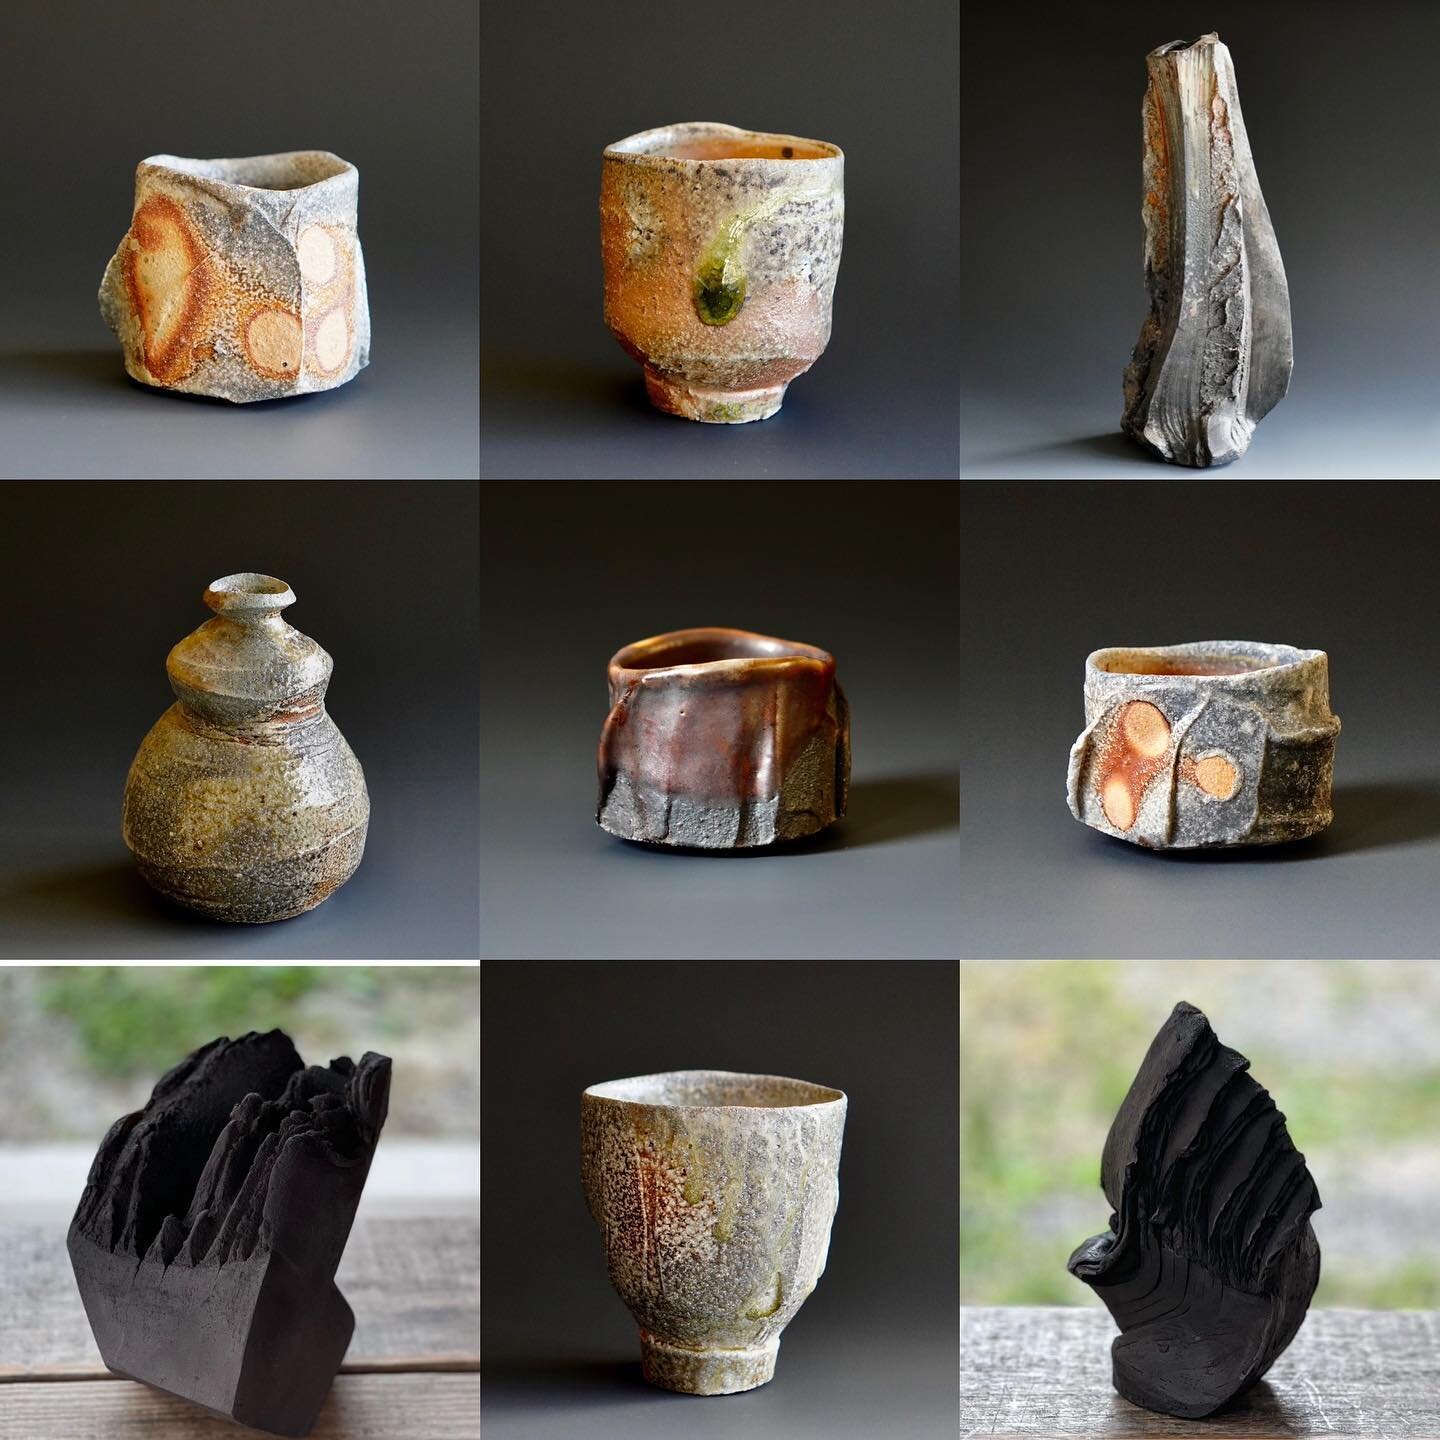 Holiday Online Sale just started.
More than 400 new pots will be available online starting Dec. 2nd, 8pm (EST, US) Link on my bio or www.akirasatake.com then click online shop🙇🏻
Free shipping within the U.S. with purchase of $200 or more, will be a